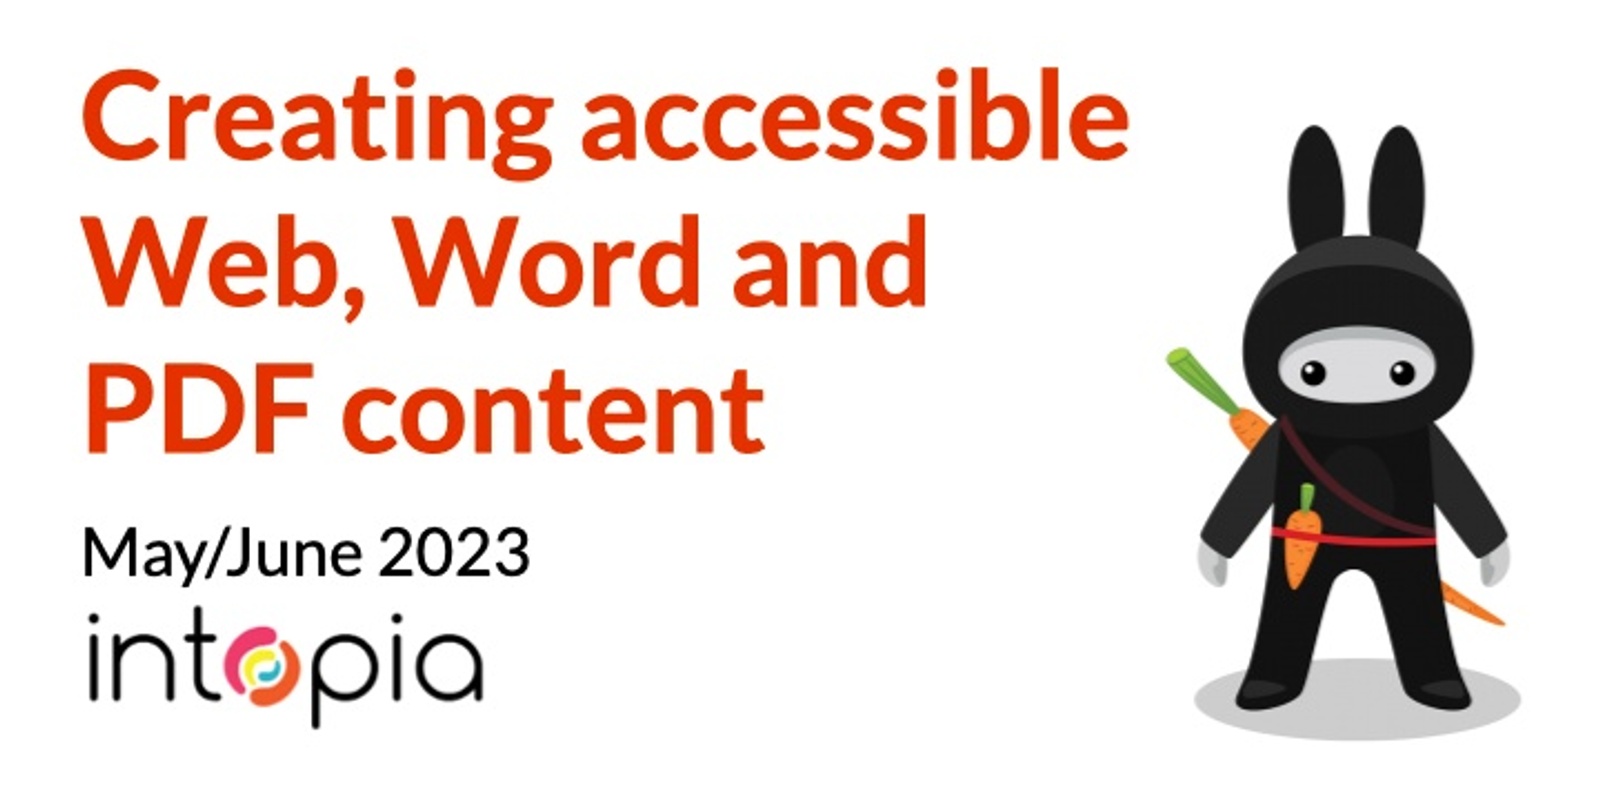 Banner image for Creating accessible Web, Word and PDF content - May/June 2023